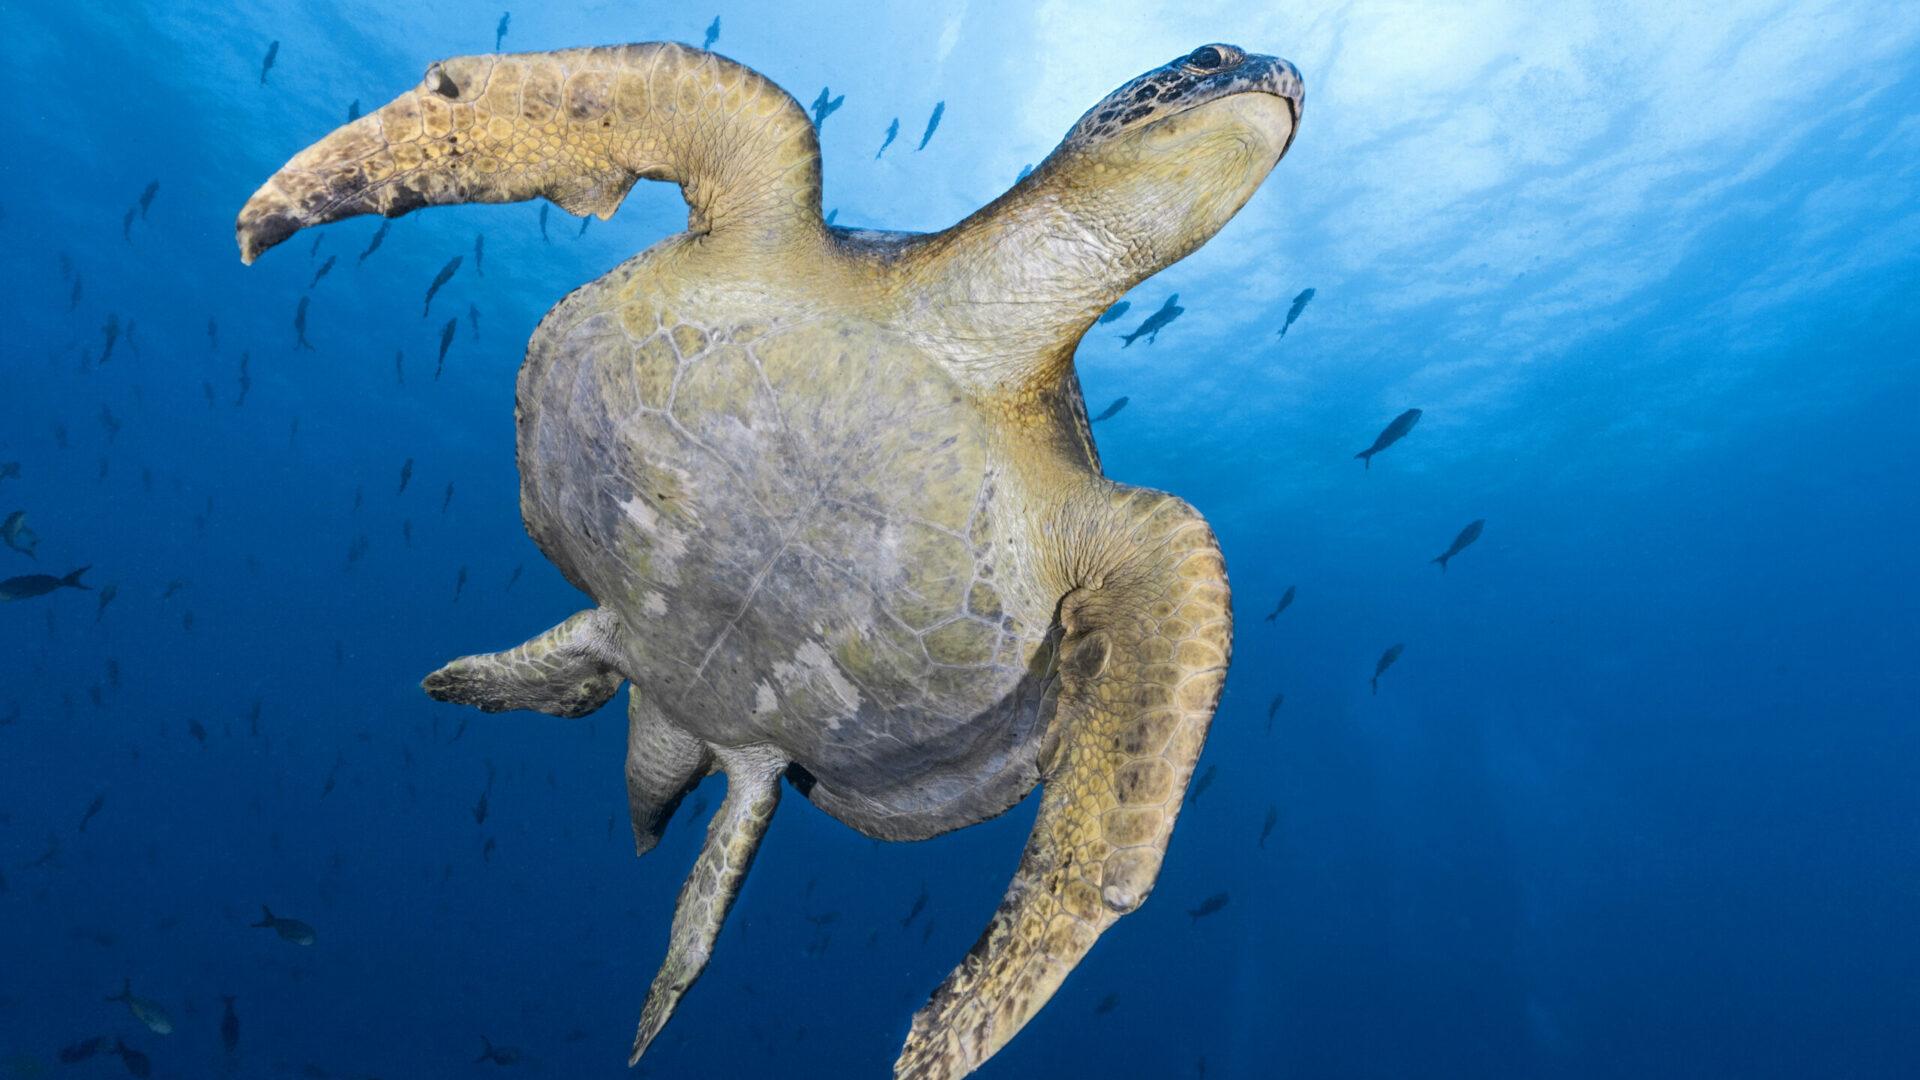 Image for The sea turtle swims underwater.